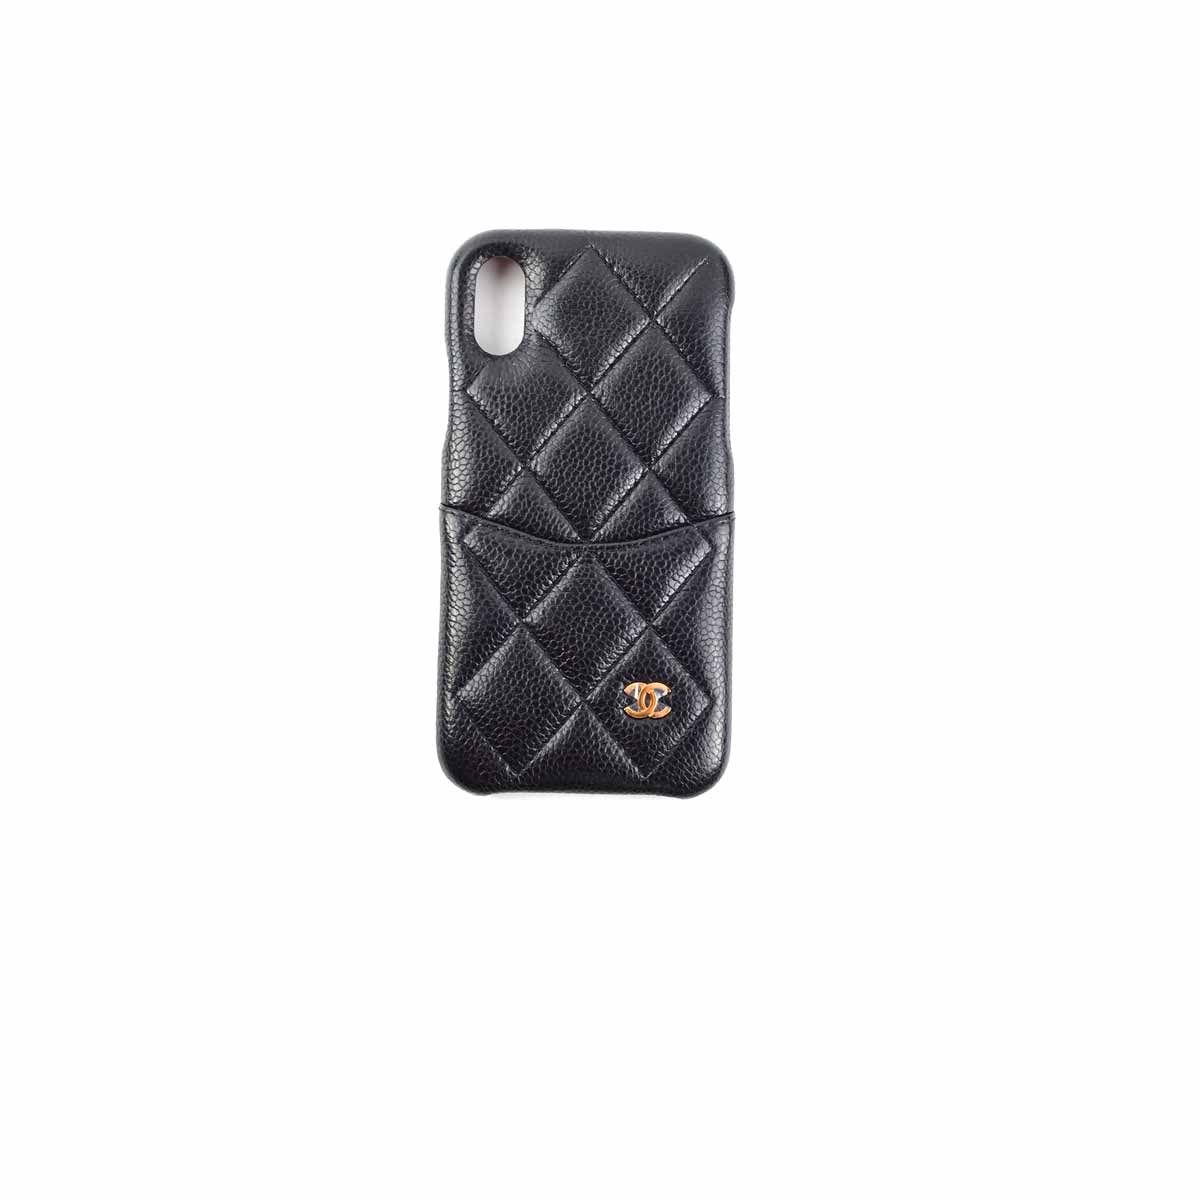 IPHONE CHANEL CASE FOR IPHONE 6PLUS6s PLUS  Shopee Philippines